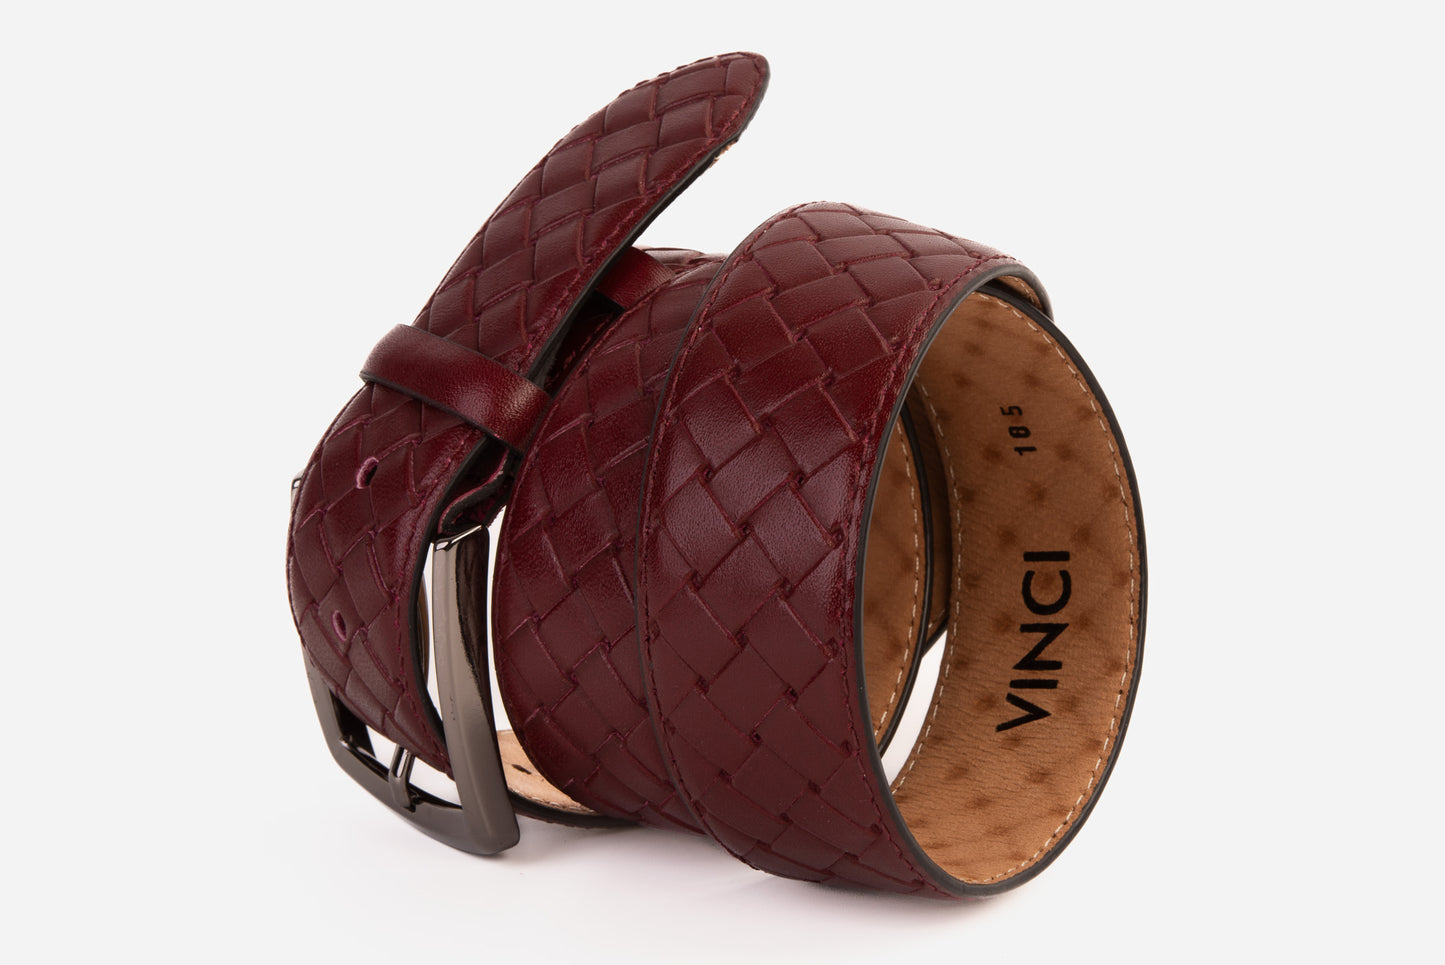 The Turan Burgundy Woven Leather Belt